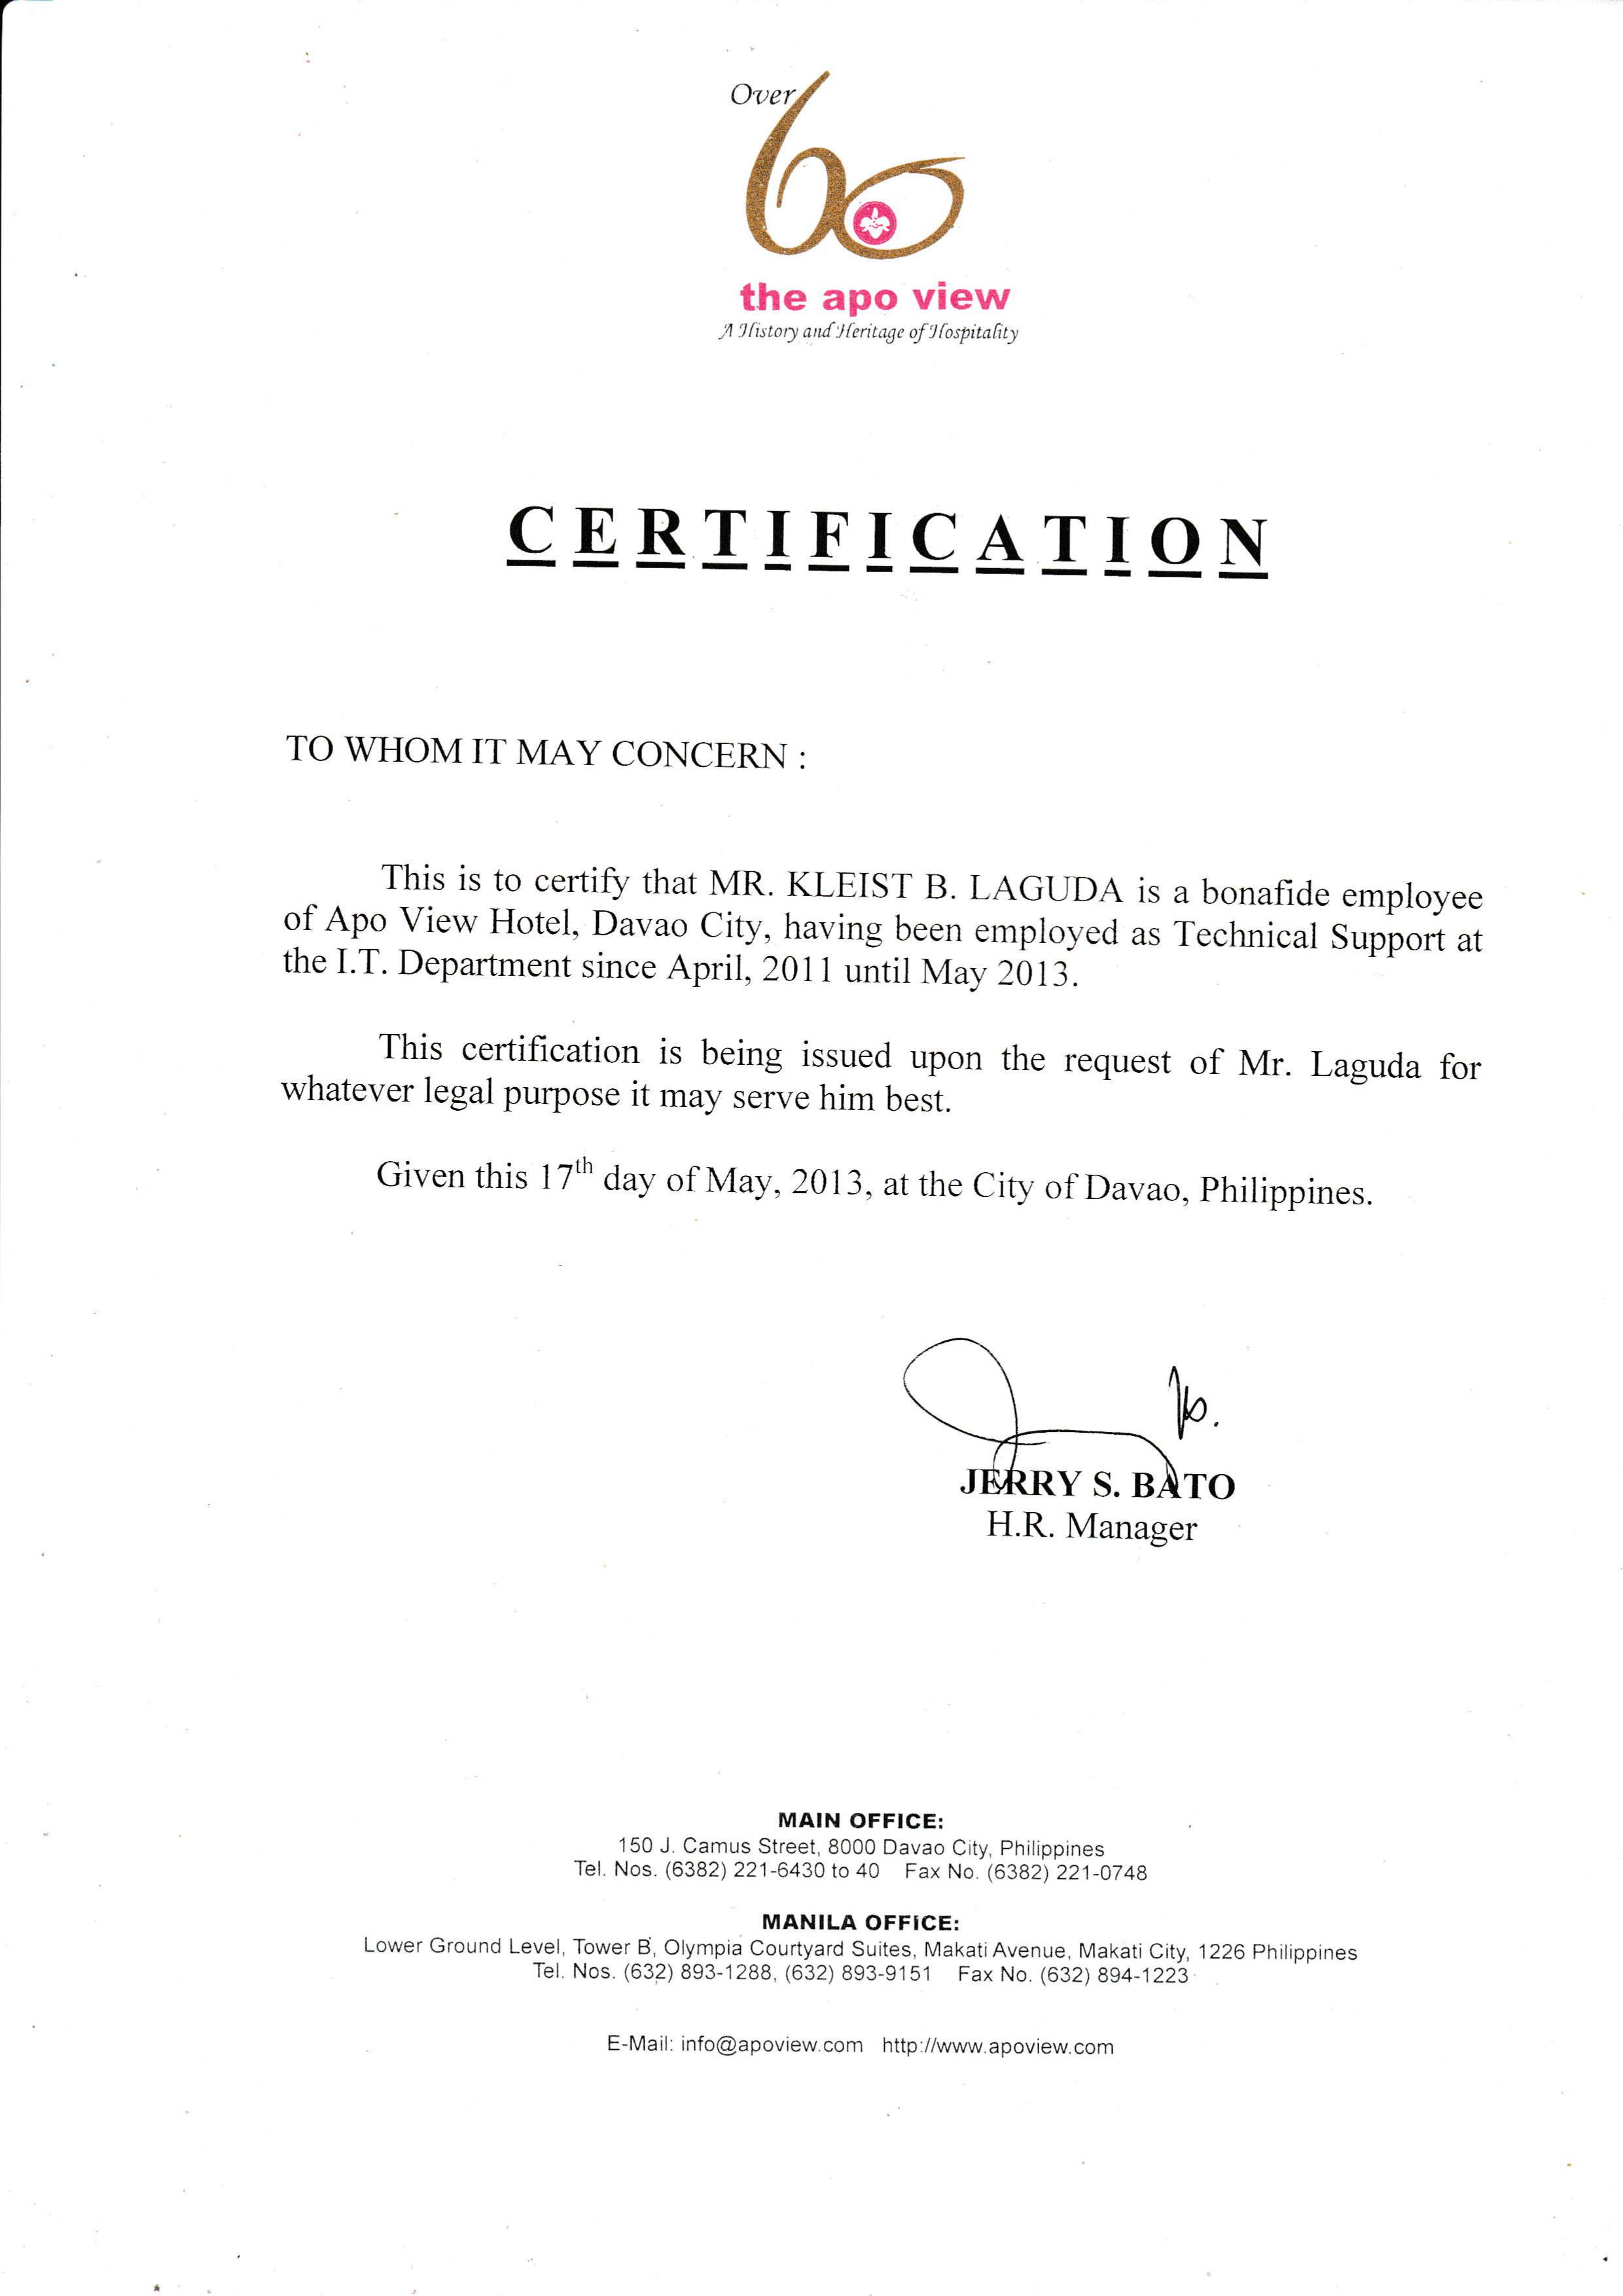 Certificate of Employment - Apo View Hotel